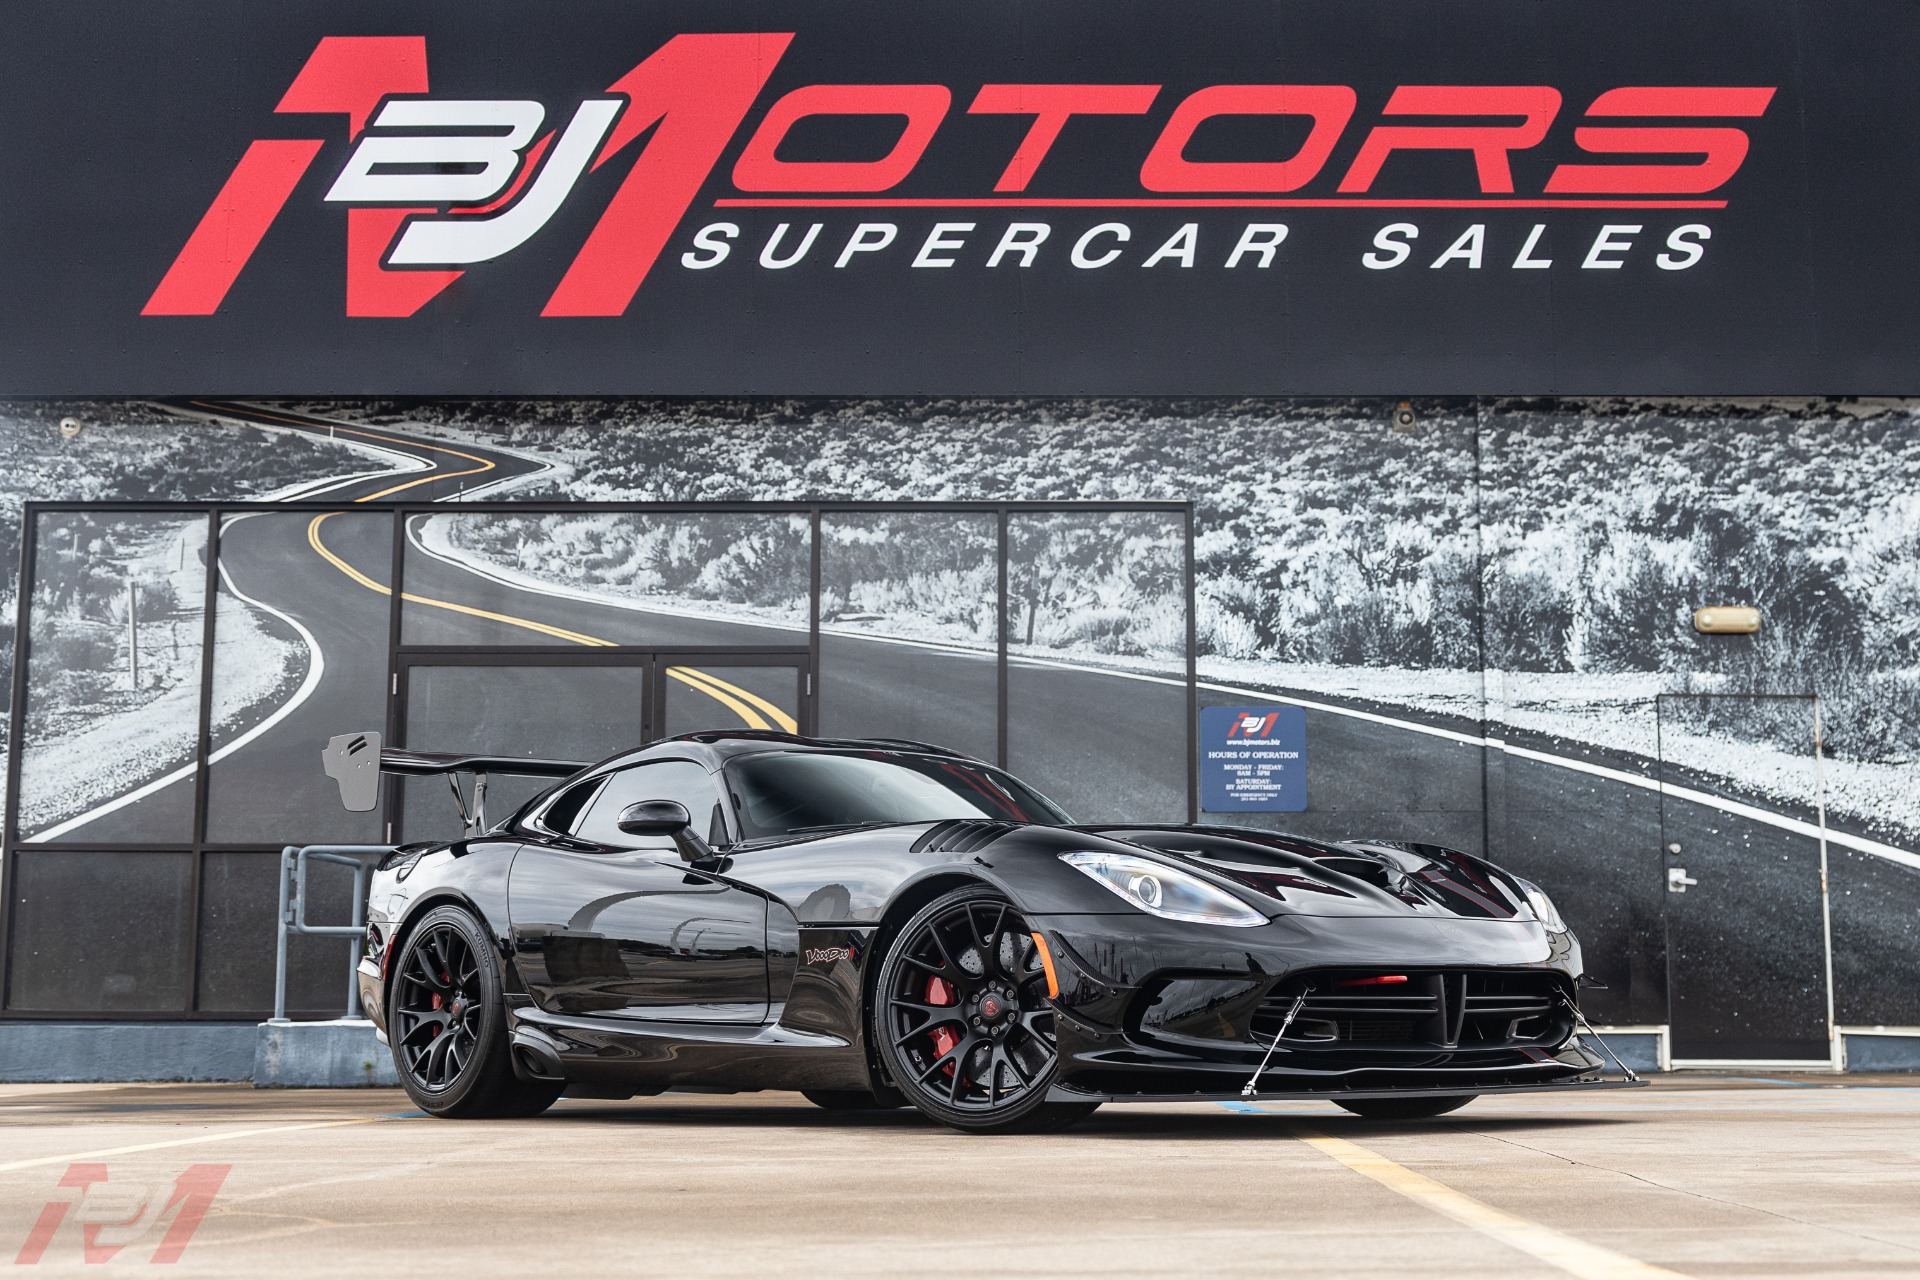 Used 2017 Dodge Viper VooDoo II Edition ACR E for sale at BJ Motors in Texas